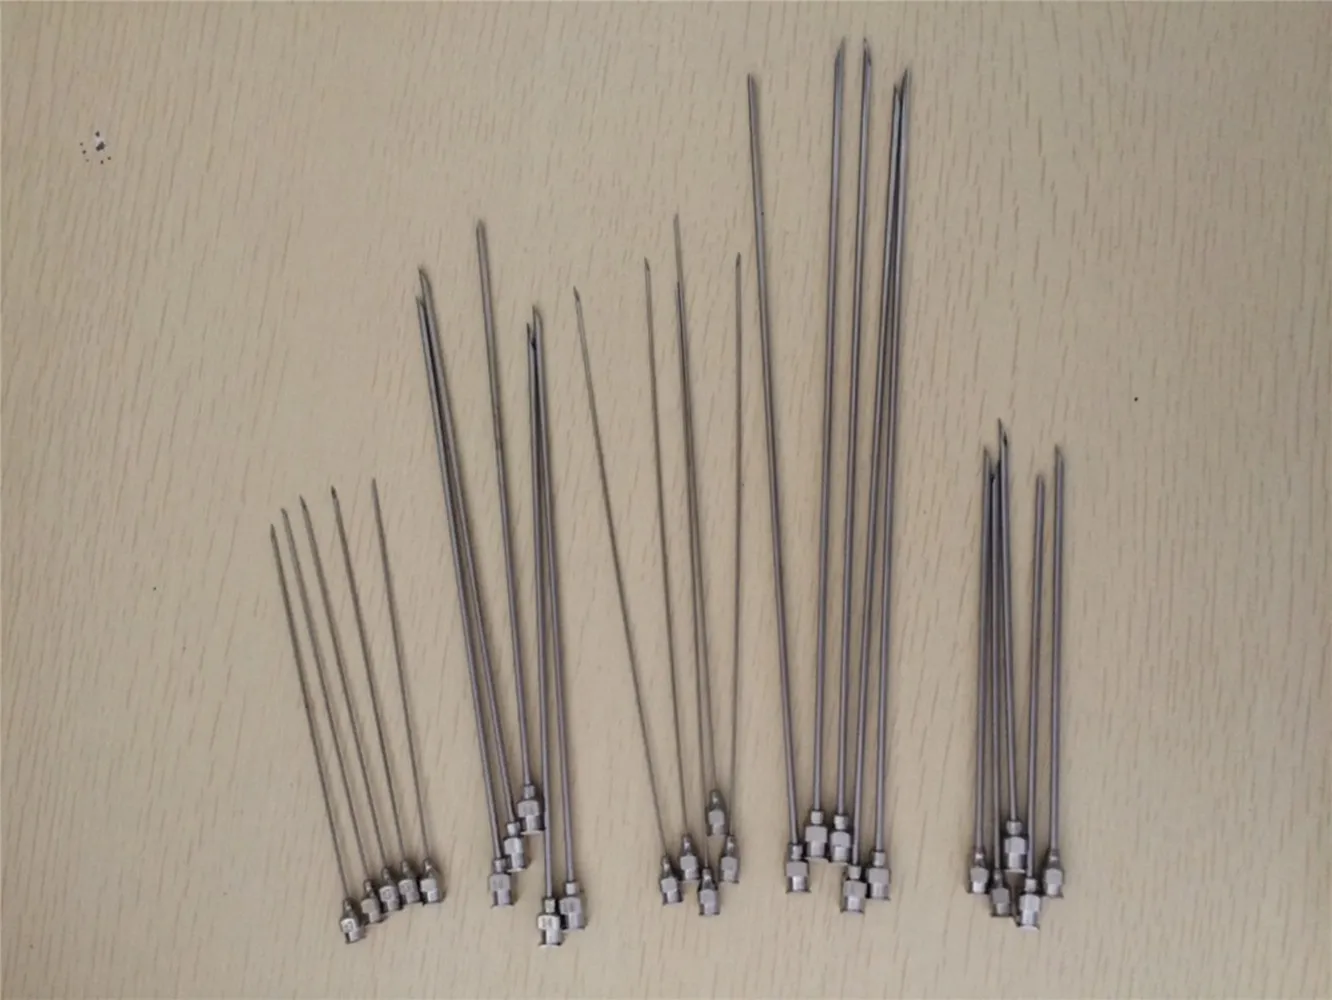 

stainless steel needle each size 5pc 13G (OD 2.5mm) 18G(1.2mm) 22G(0.7mm) 25G(0.5mm) length 80mm 120mm 150mm 250mm total 80pc